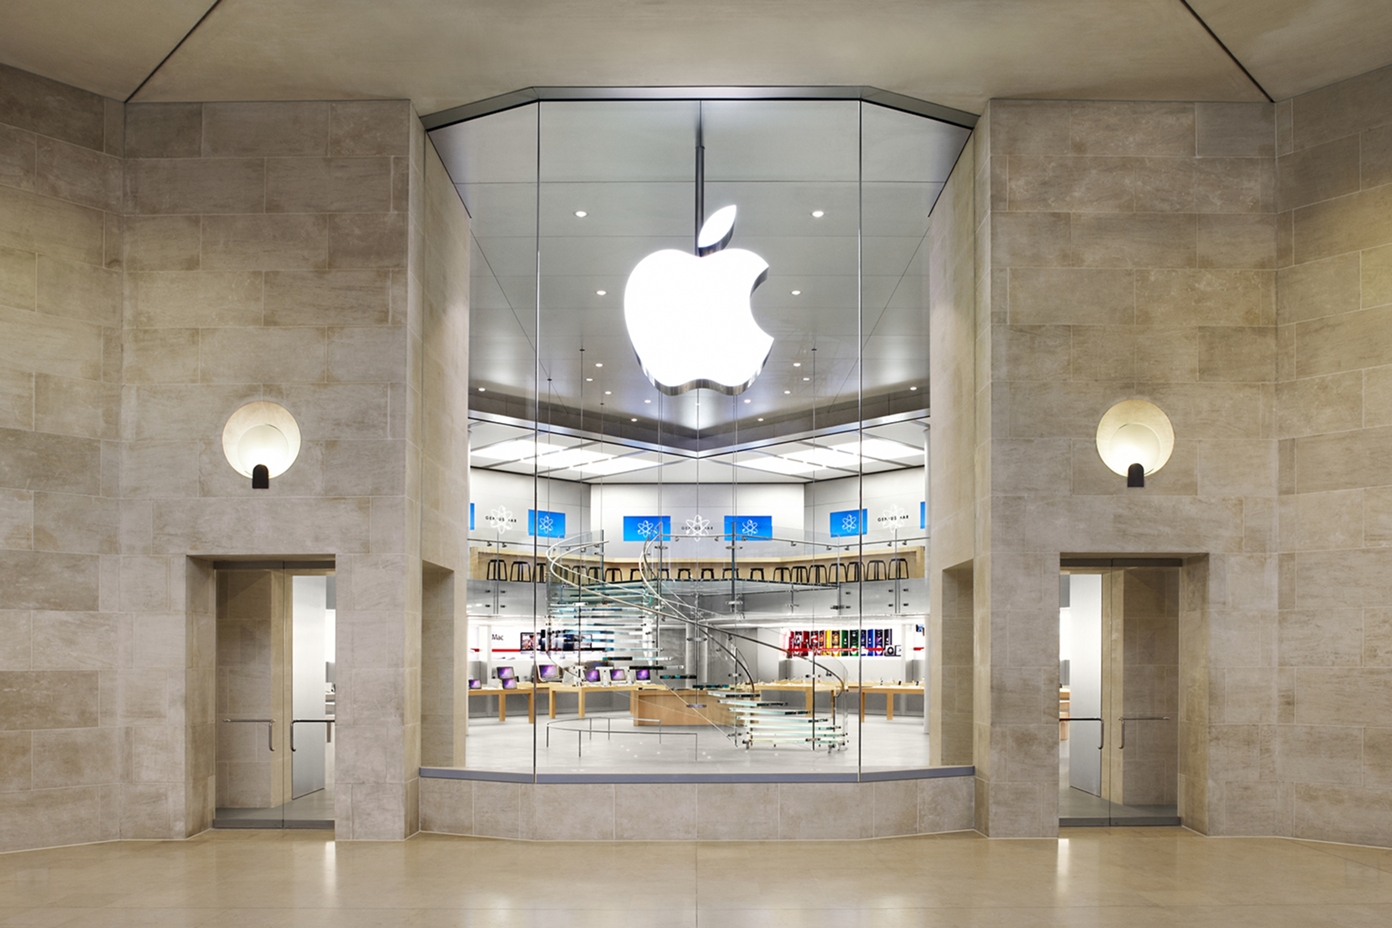 Apple is opening a new U.S. retail store in New Jersey